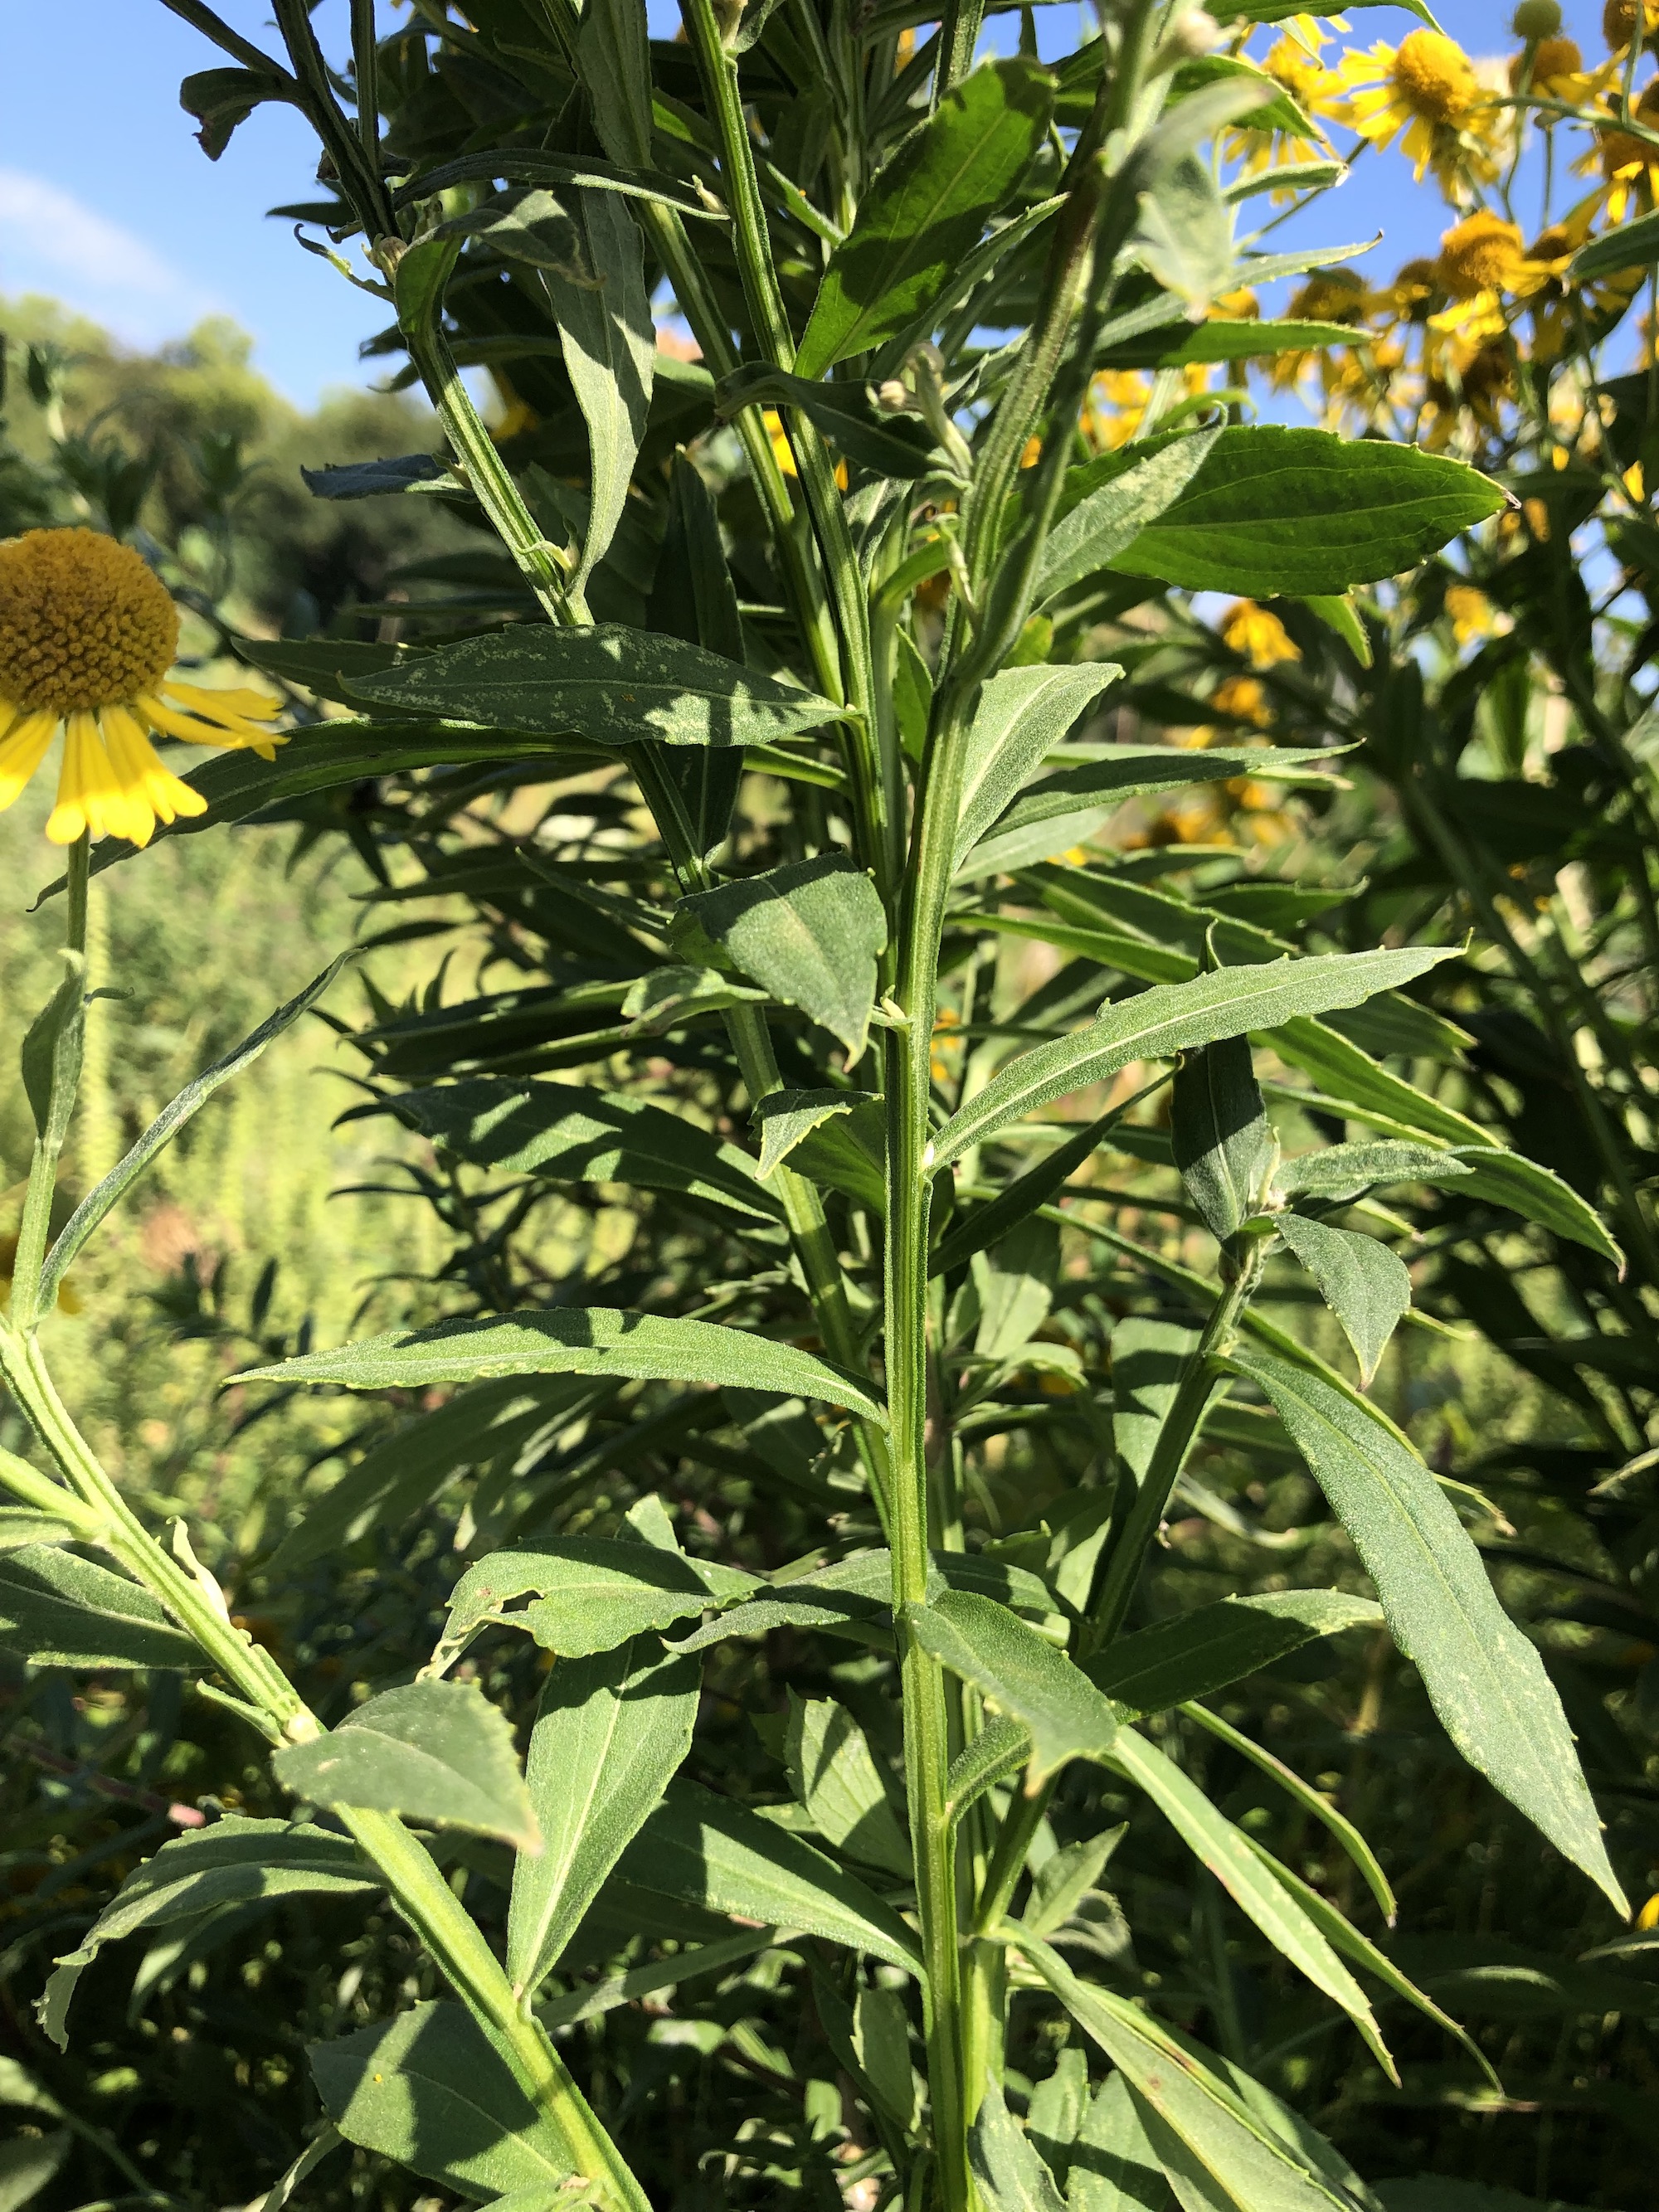 Common Sneezeweed leaves and stalk on September 5, 2021.